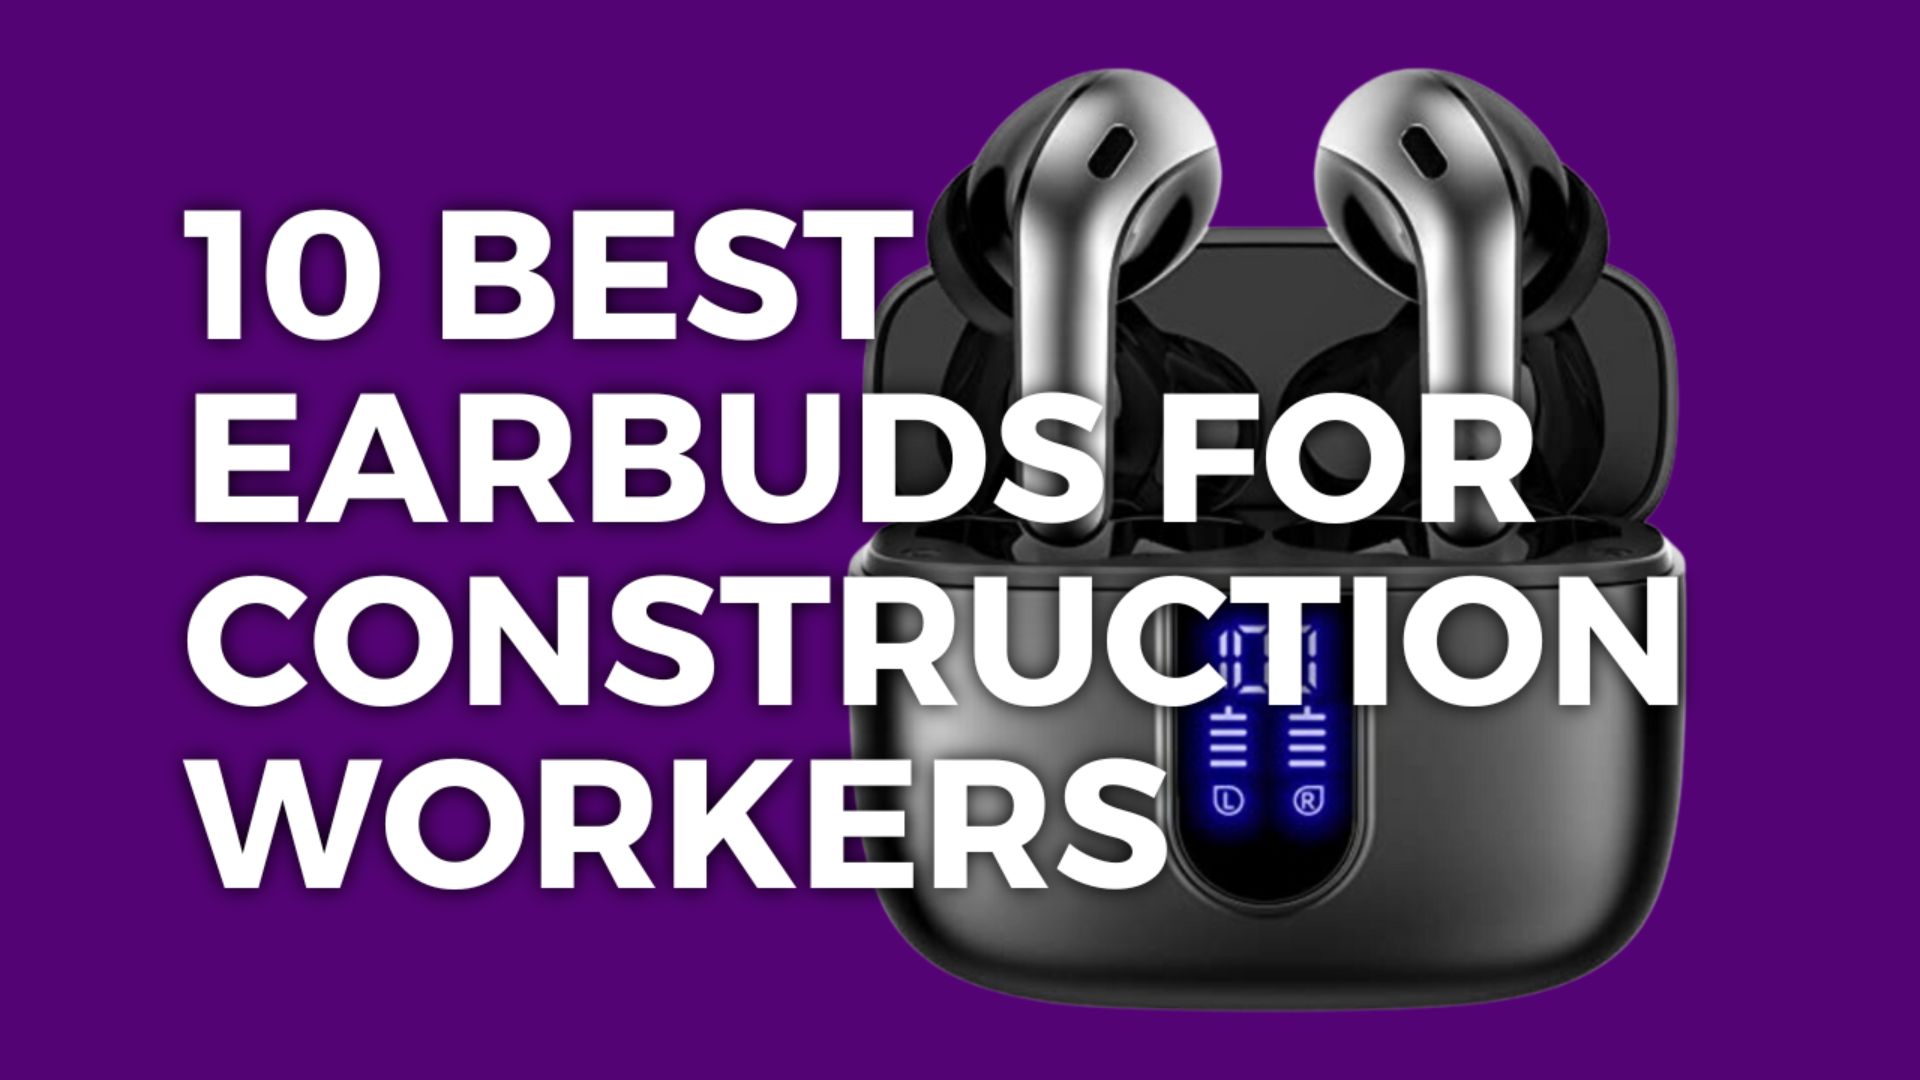 10 Best Earbuds For Construction Workers